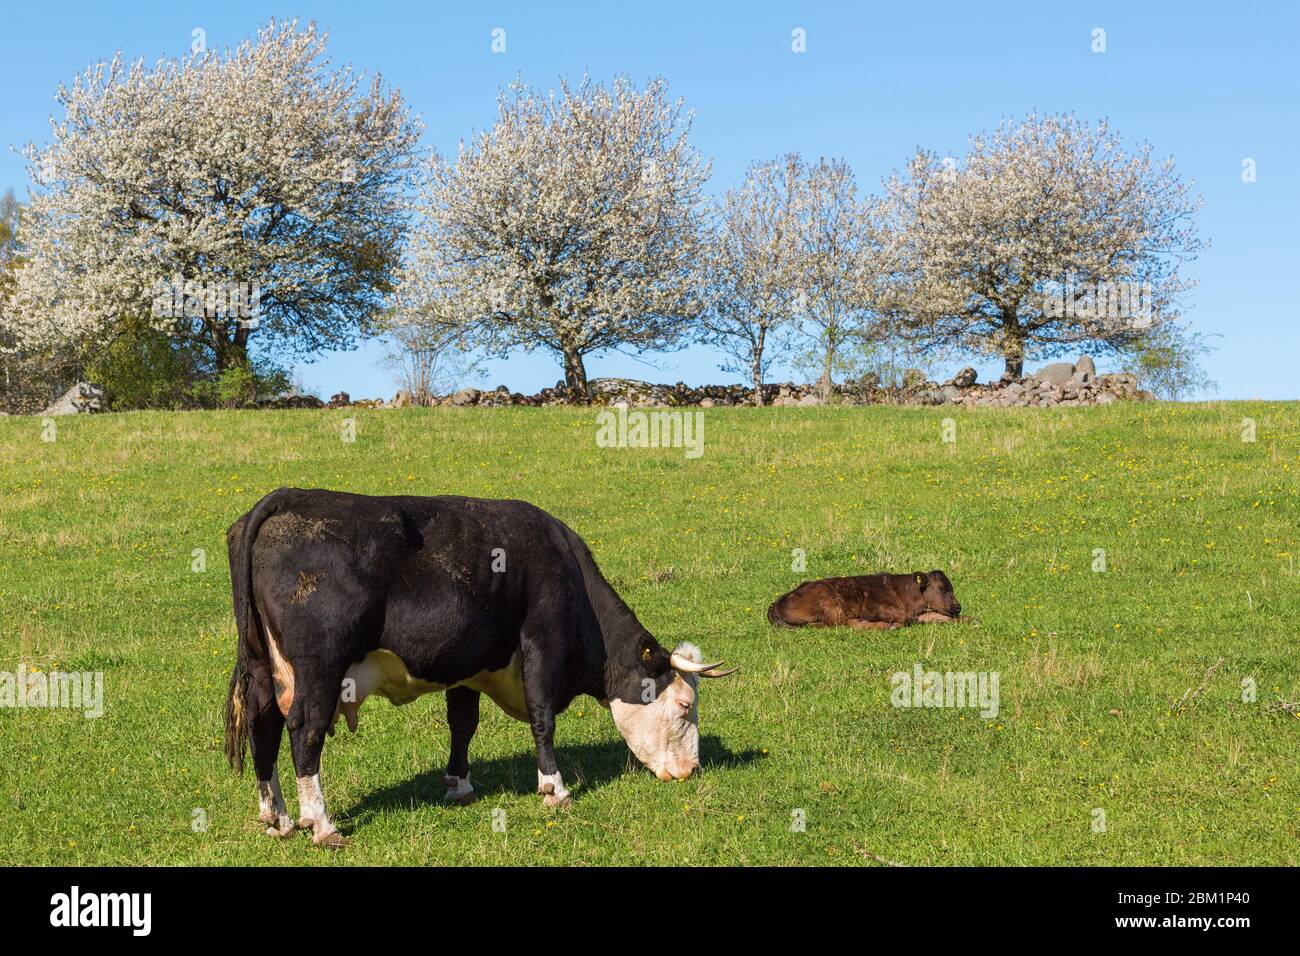 Grazing cow with a calf on a meadow Stock Photo